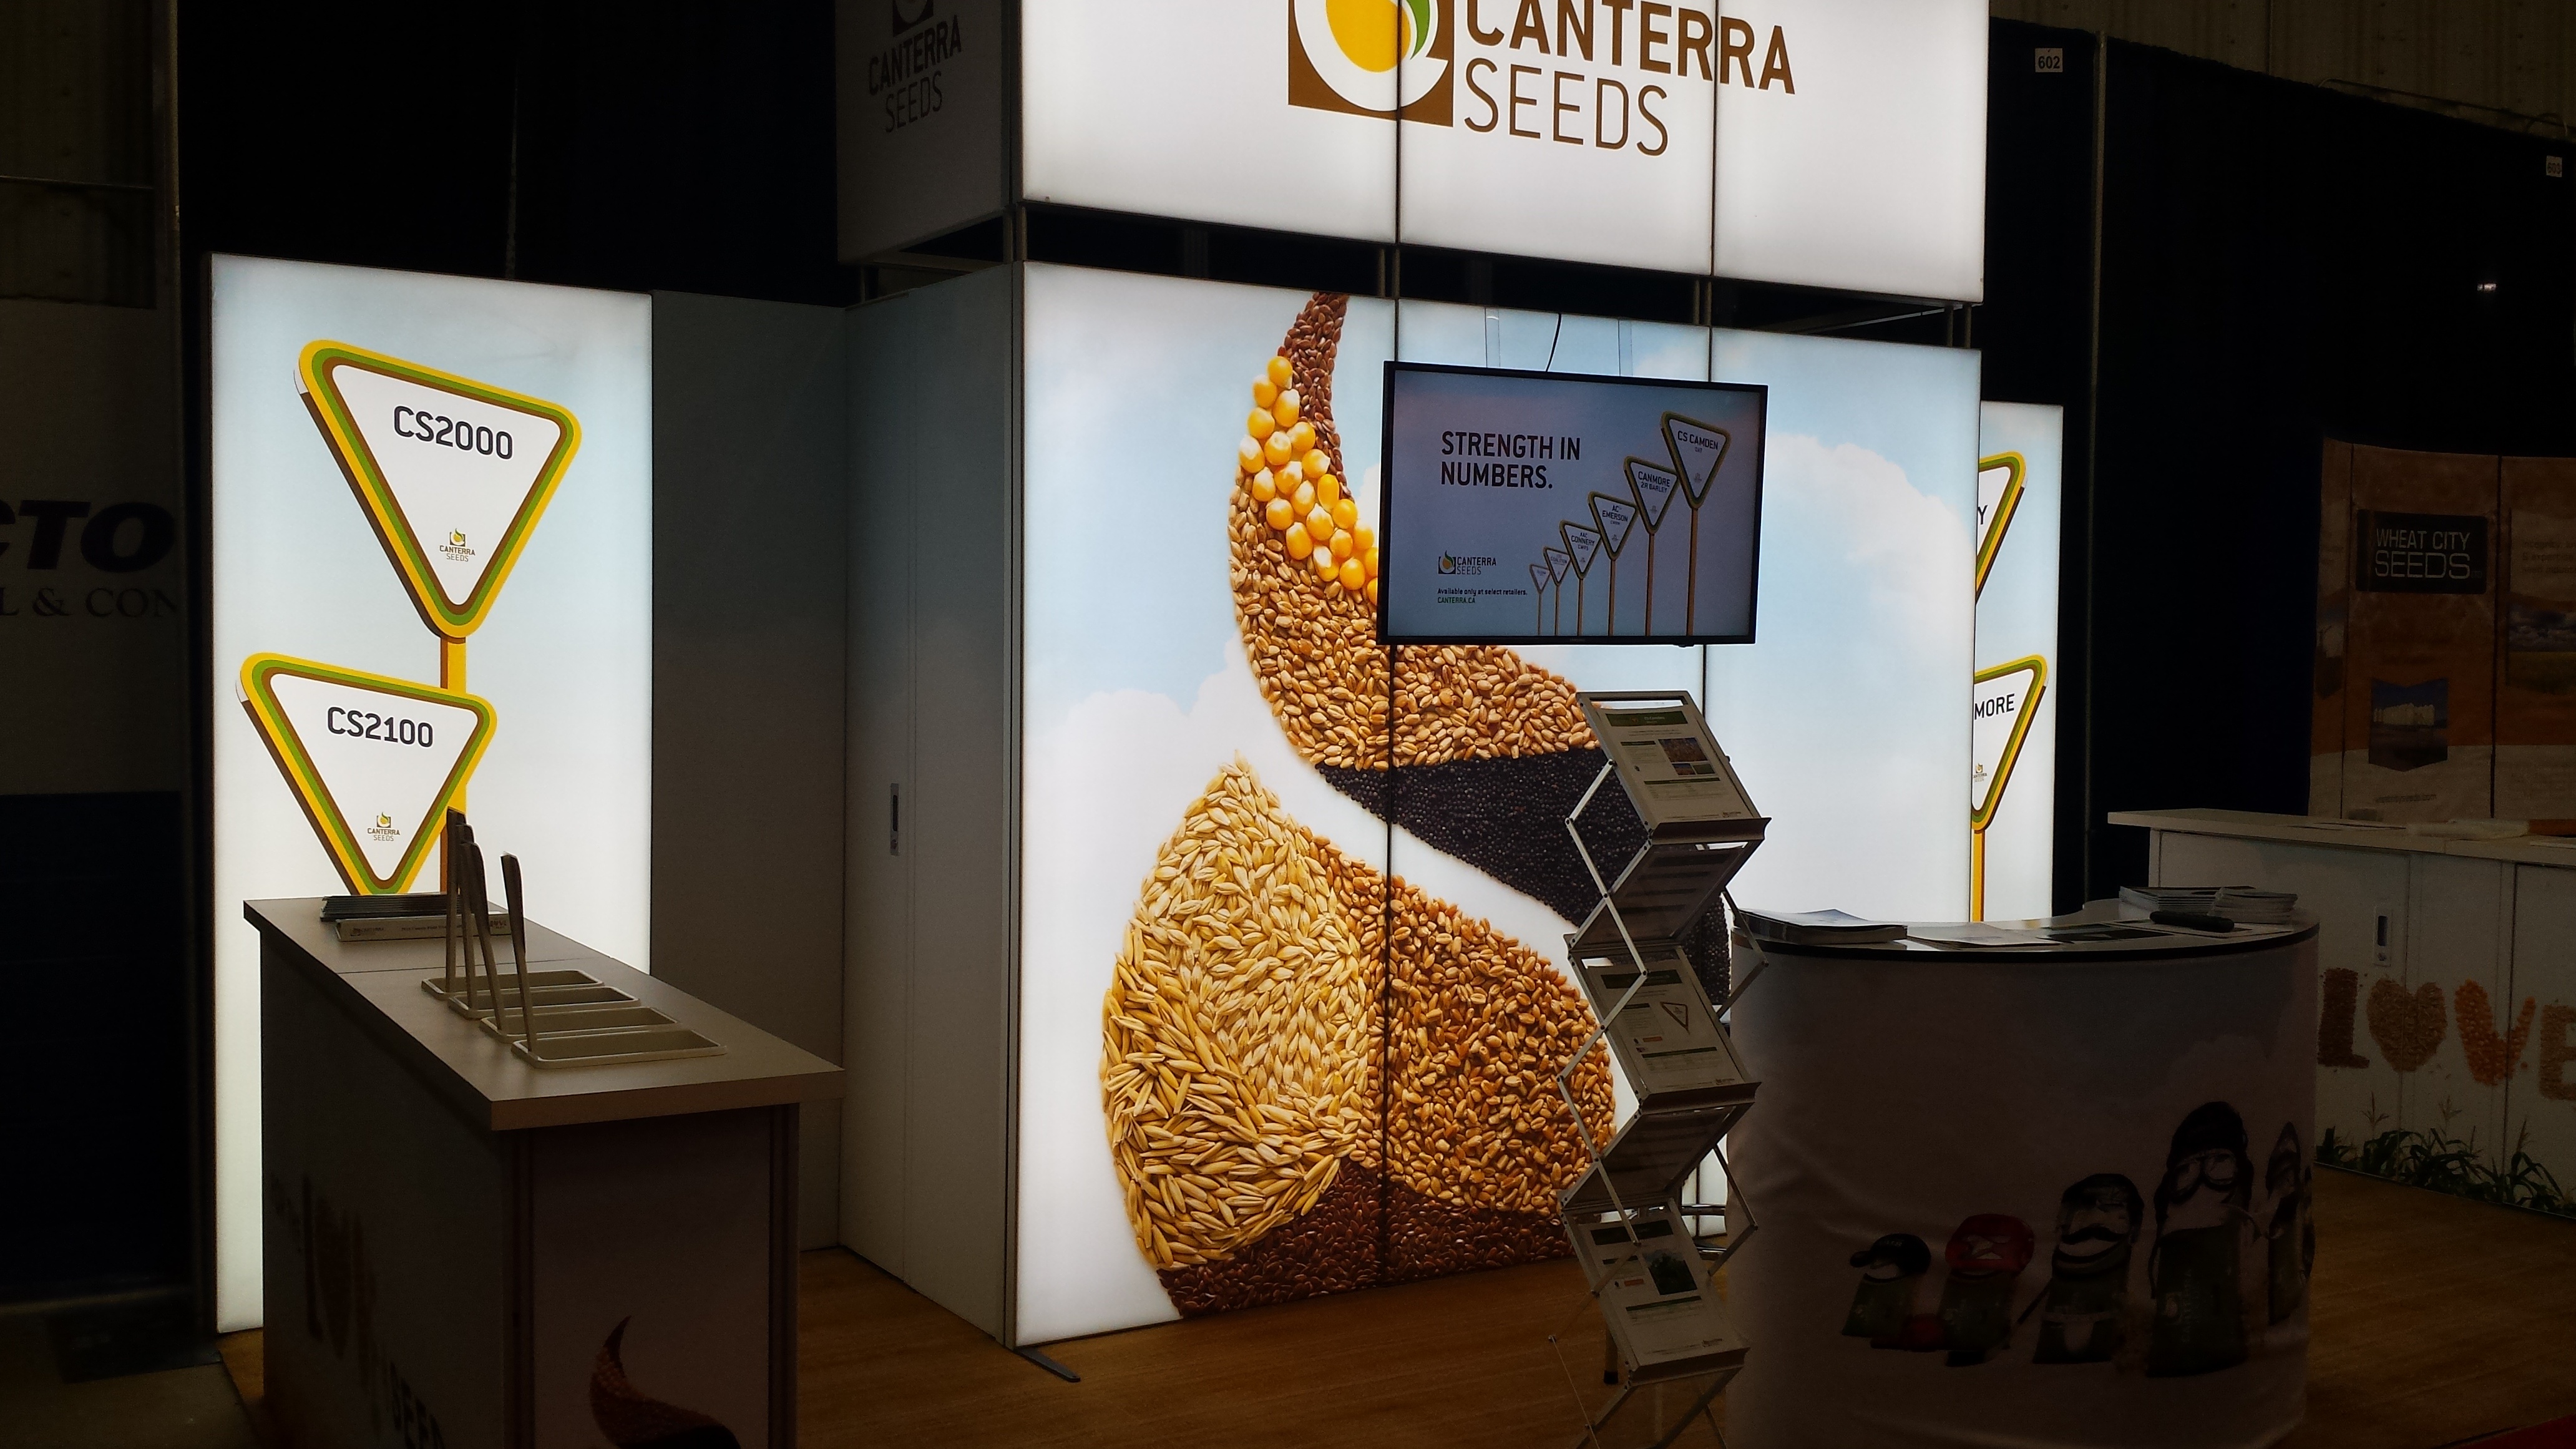 The CANTERRA SEEDS tradeshow booth